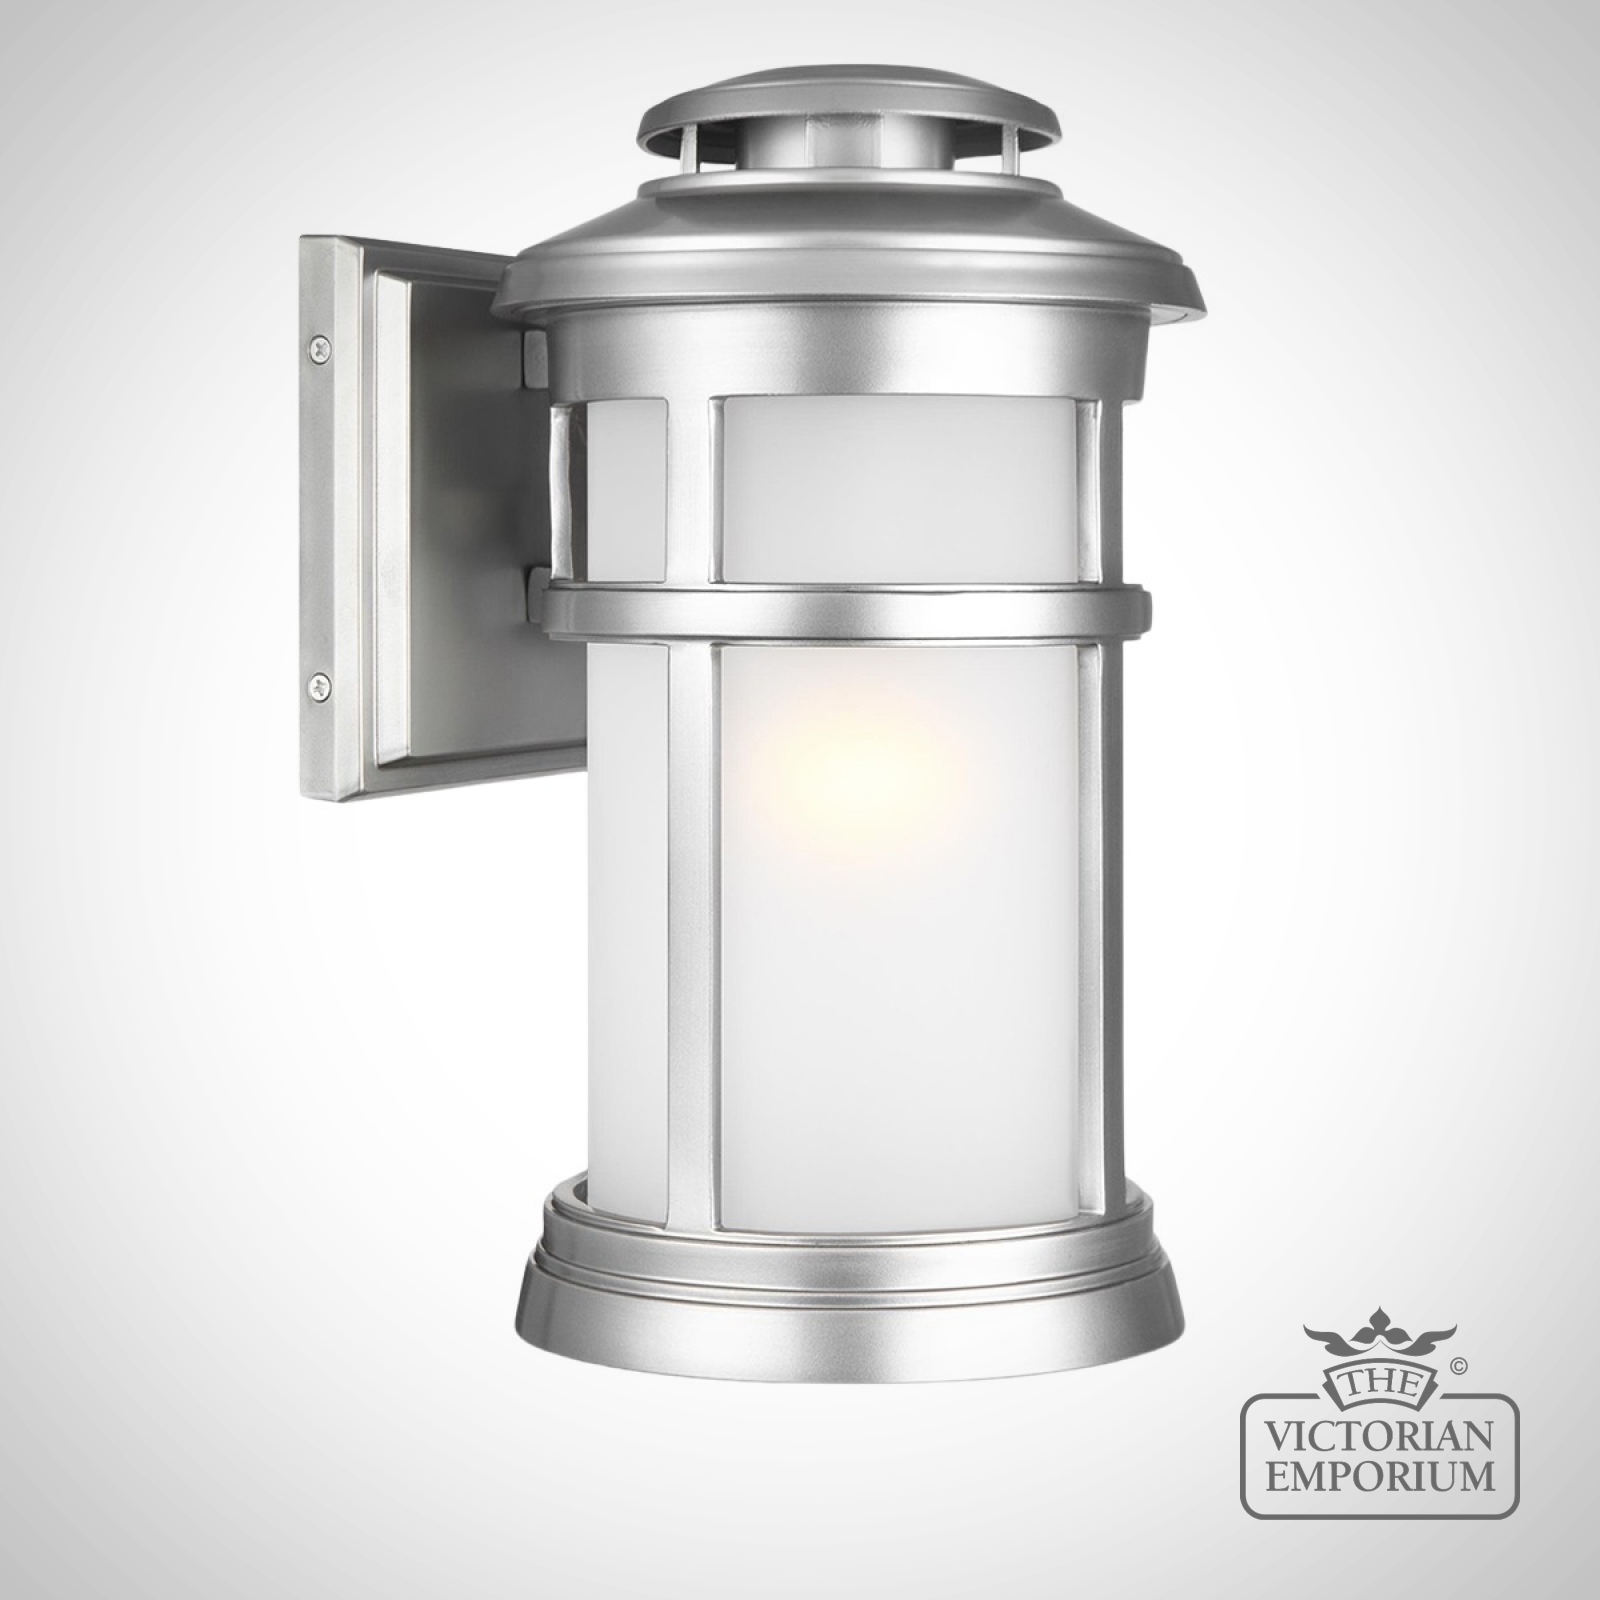 Newport medium exterior wall light in painted brushed steel